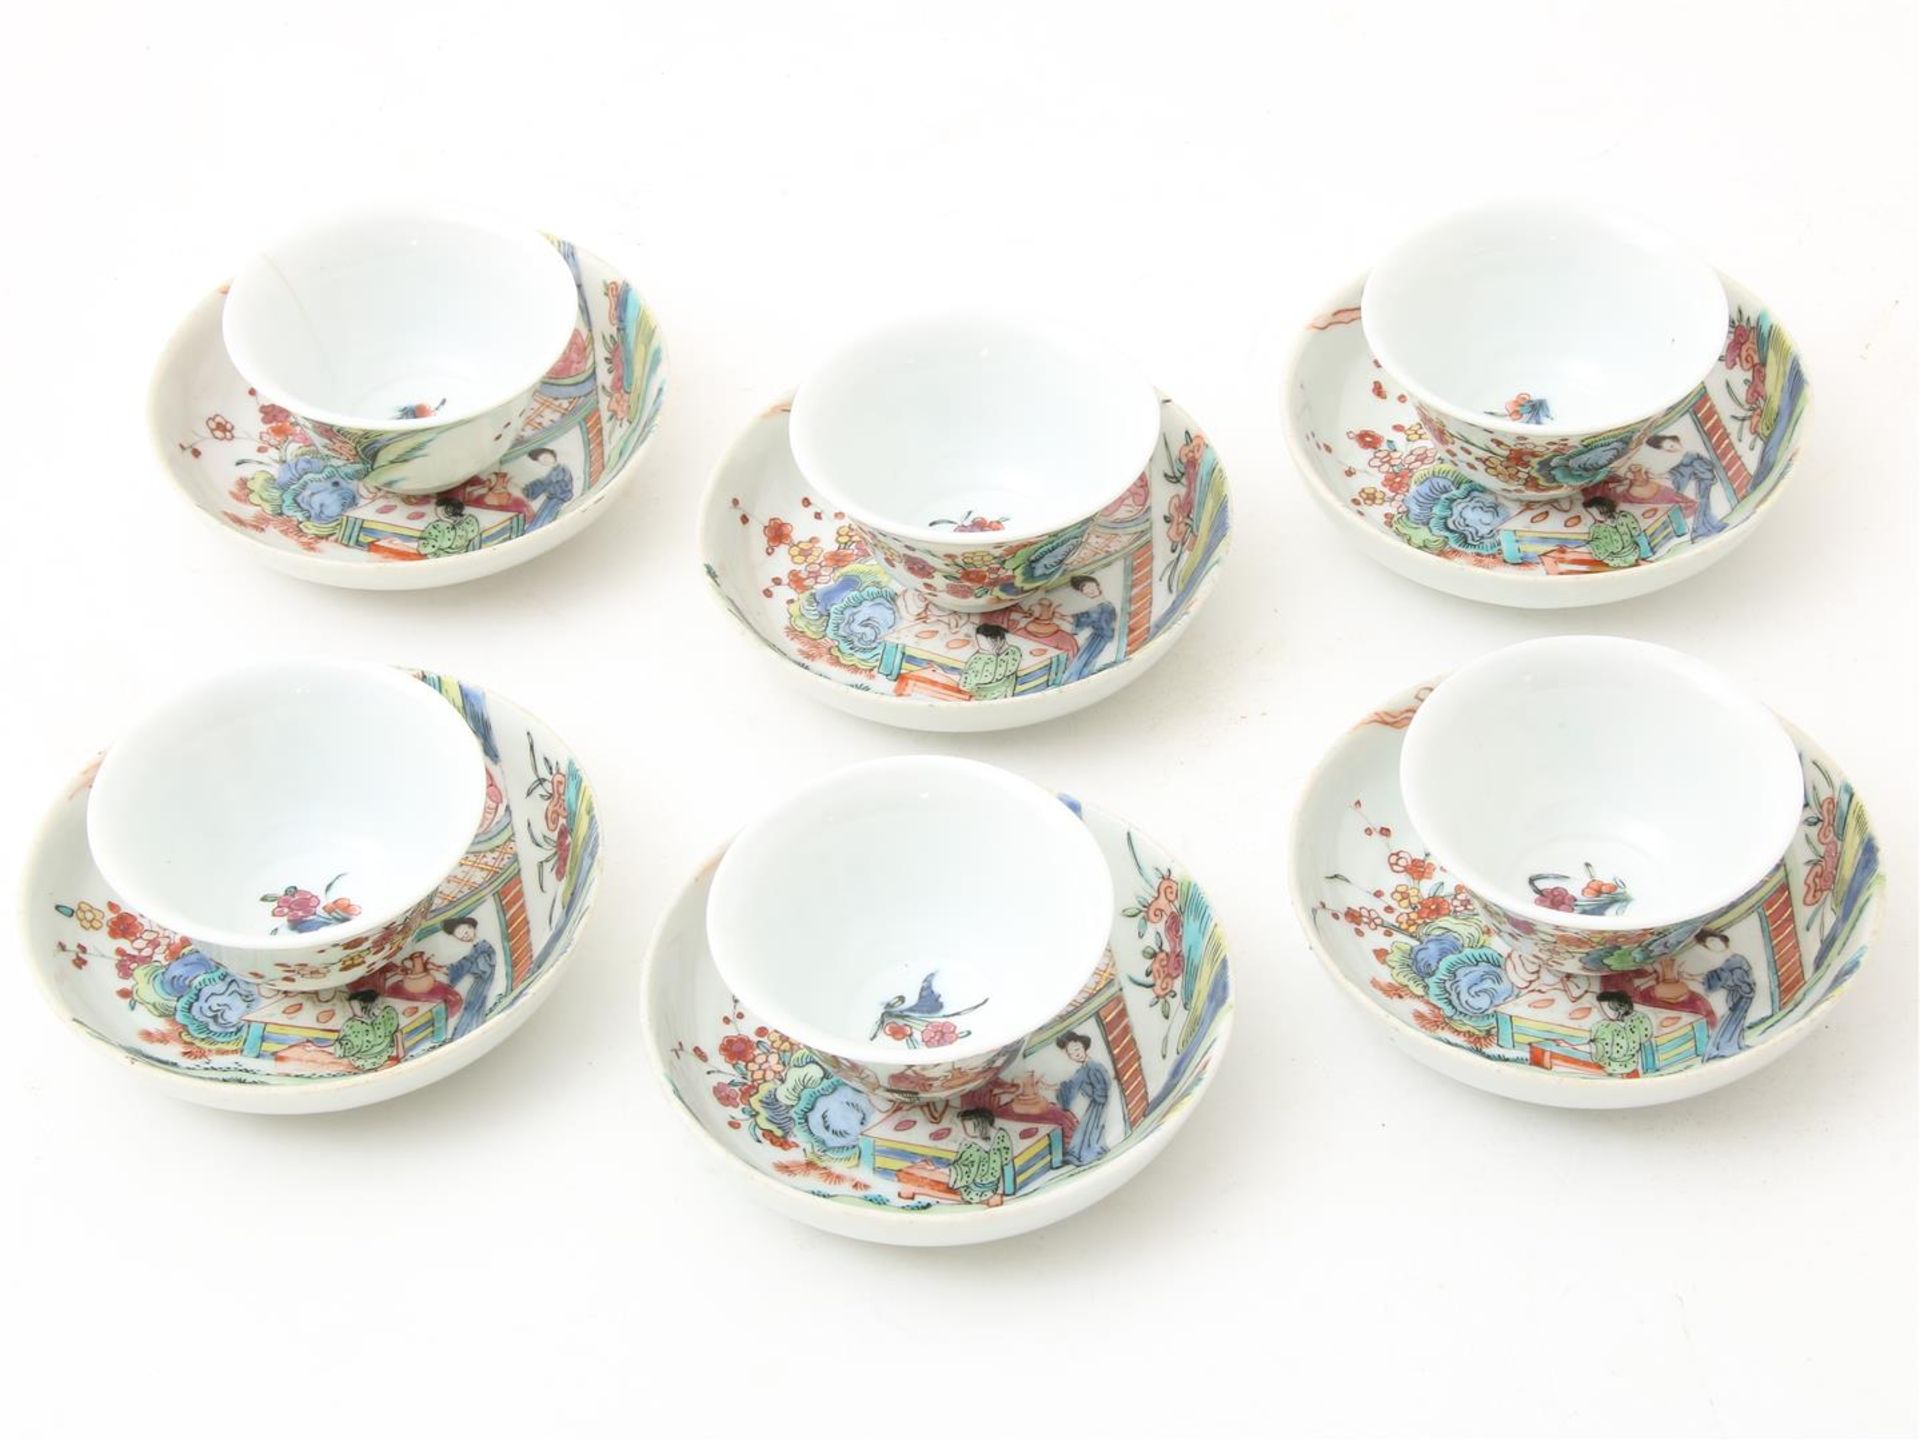 Chinese porcelain, cups and saucers, Famille Rose, 19th century